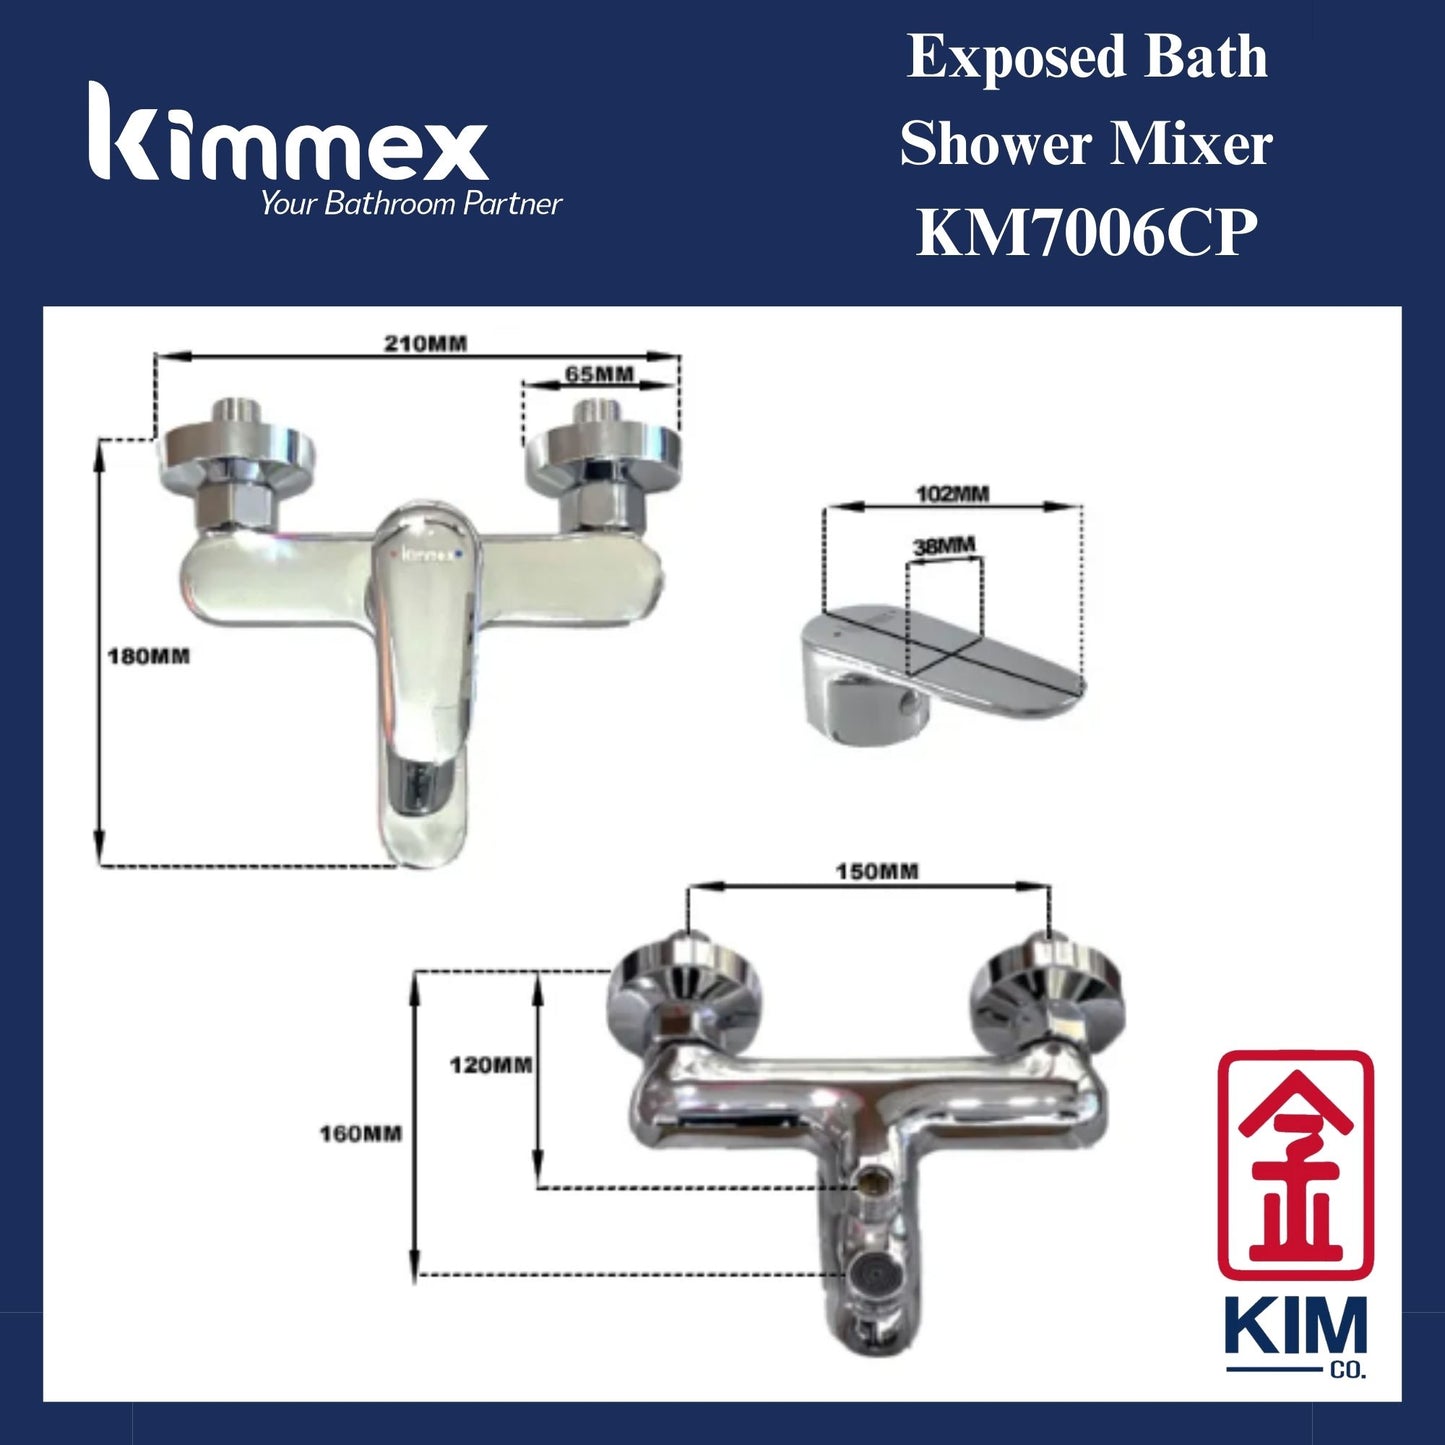 kimmex A Series Exposed Bath Shower Mixer Without Shower Kit (KM7006CP)